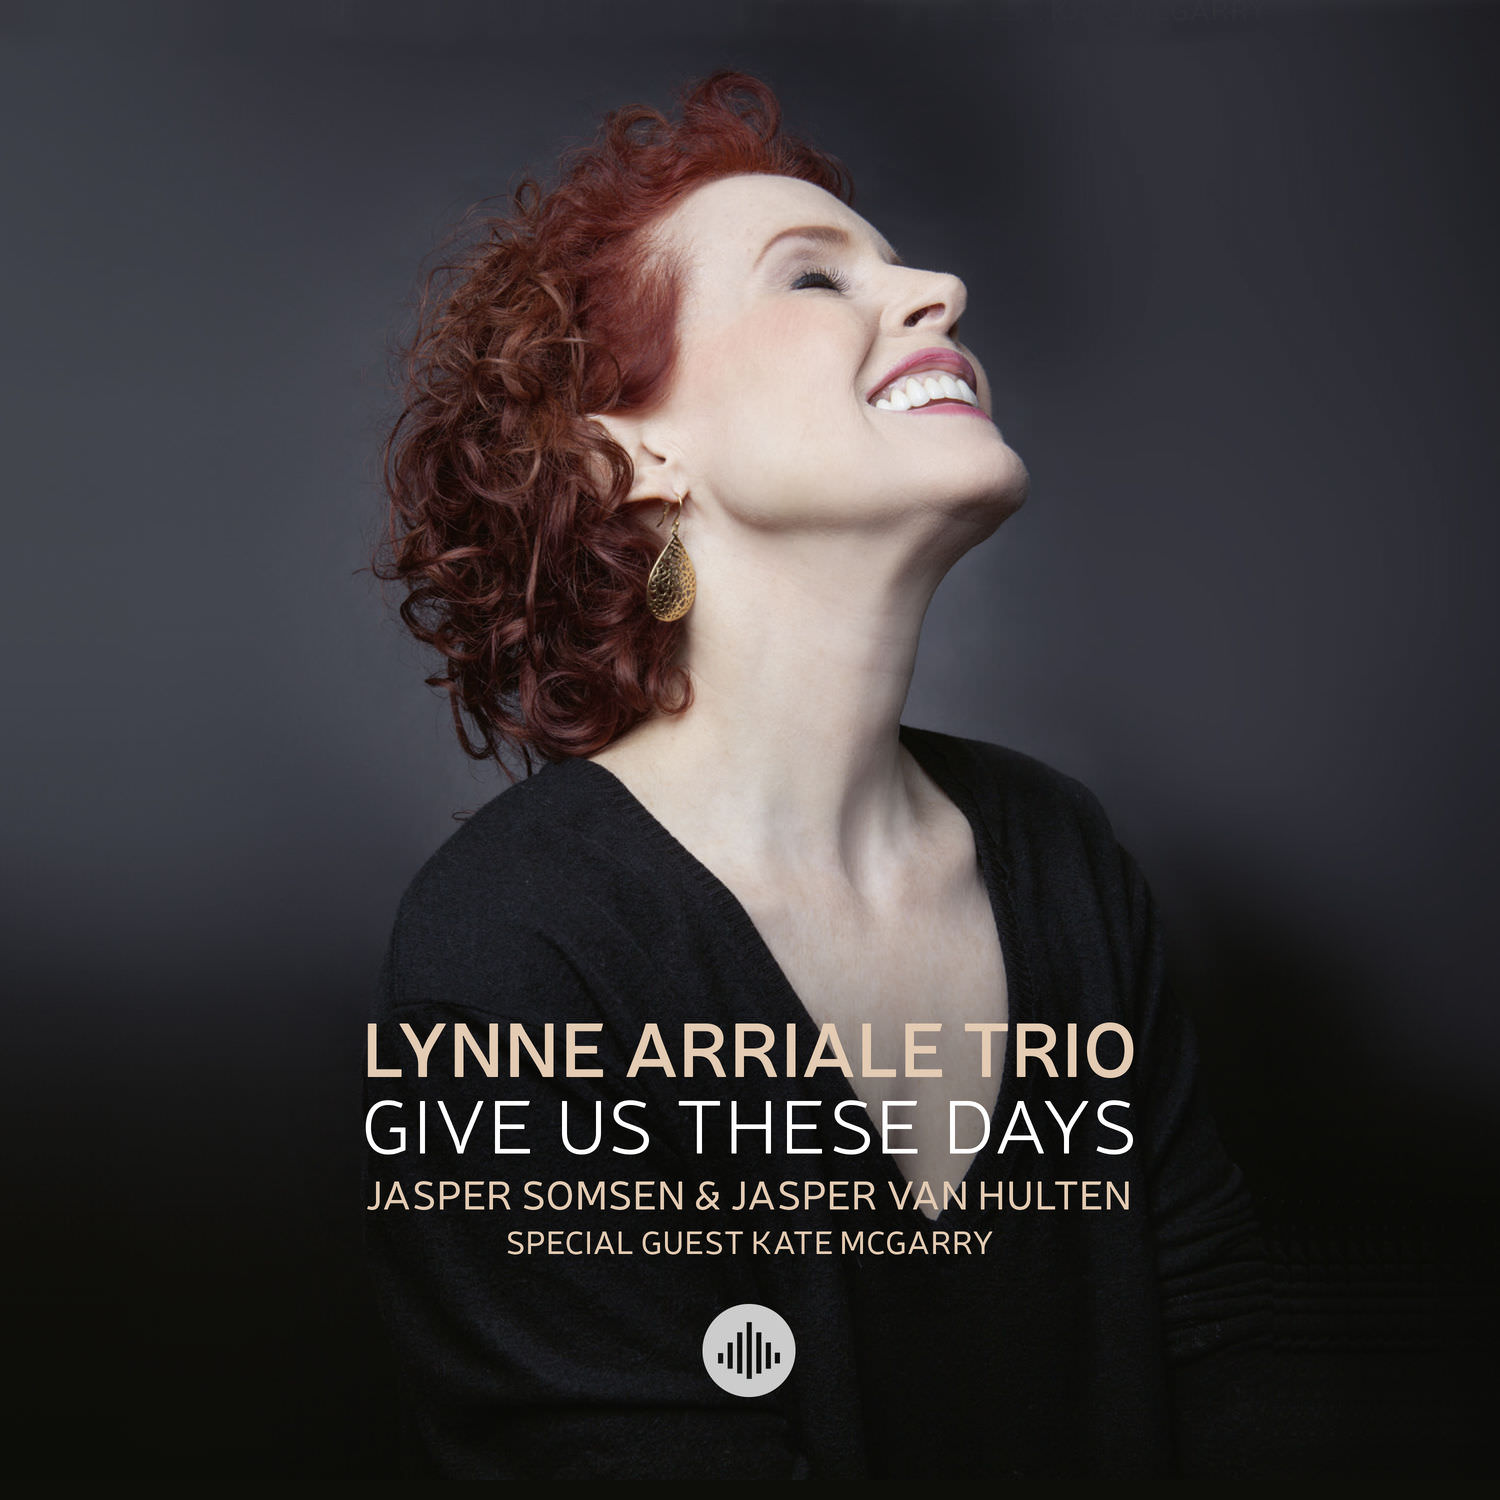 Lynne Arriale Trio – Give Us These Days (2018) [FLAC 24bit/48kHz]